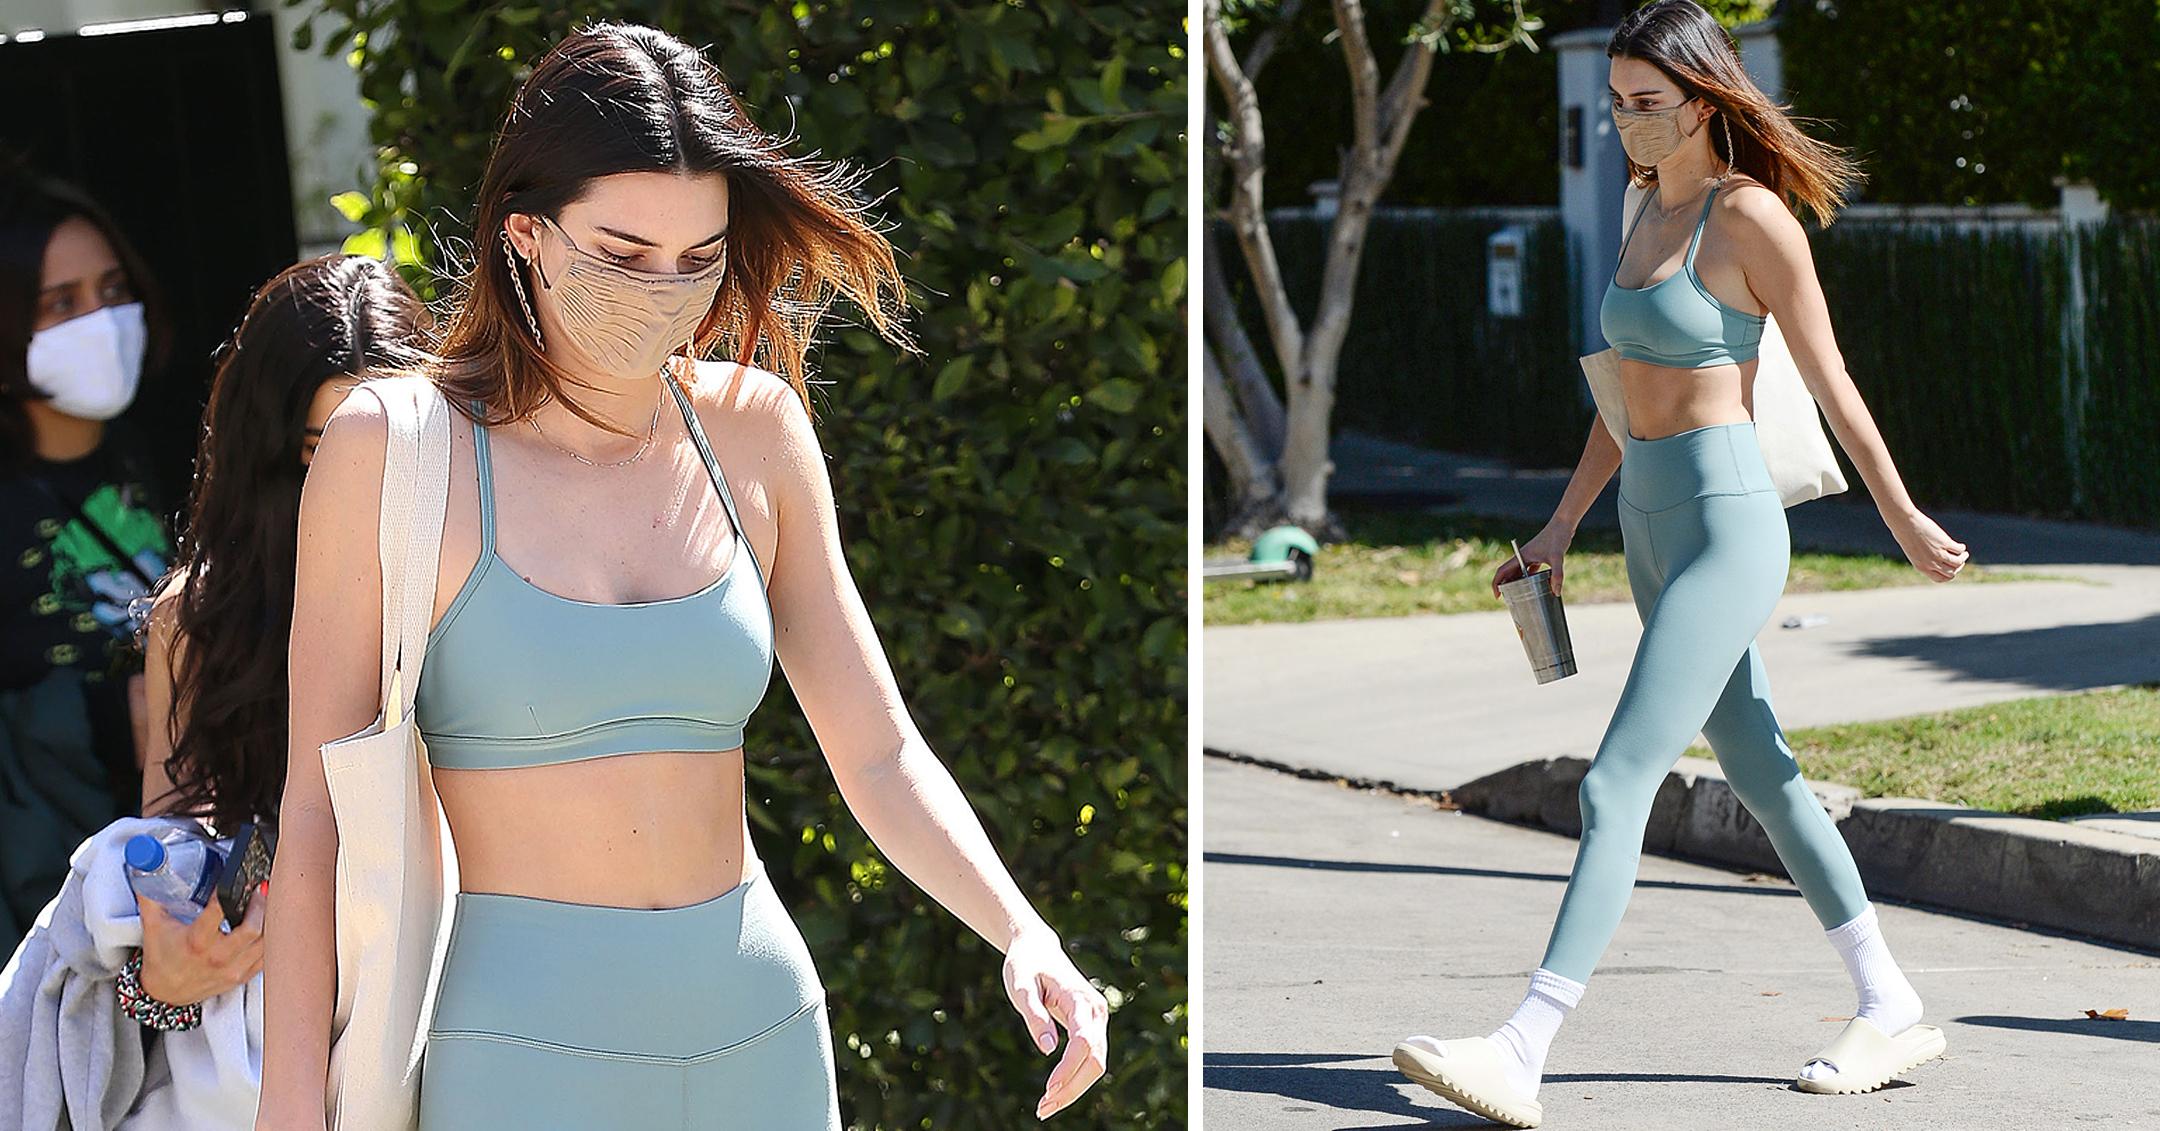 Kendall Jenner flashes her toned abs as she steps out for lunch